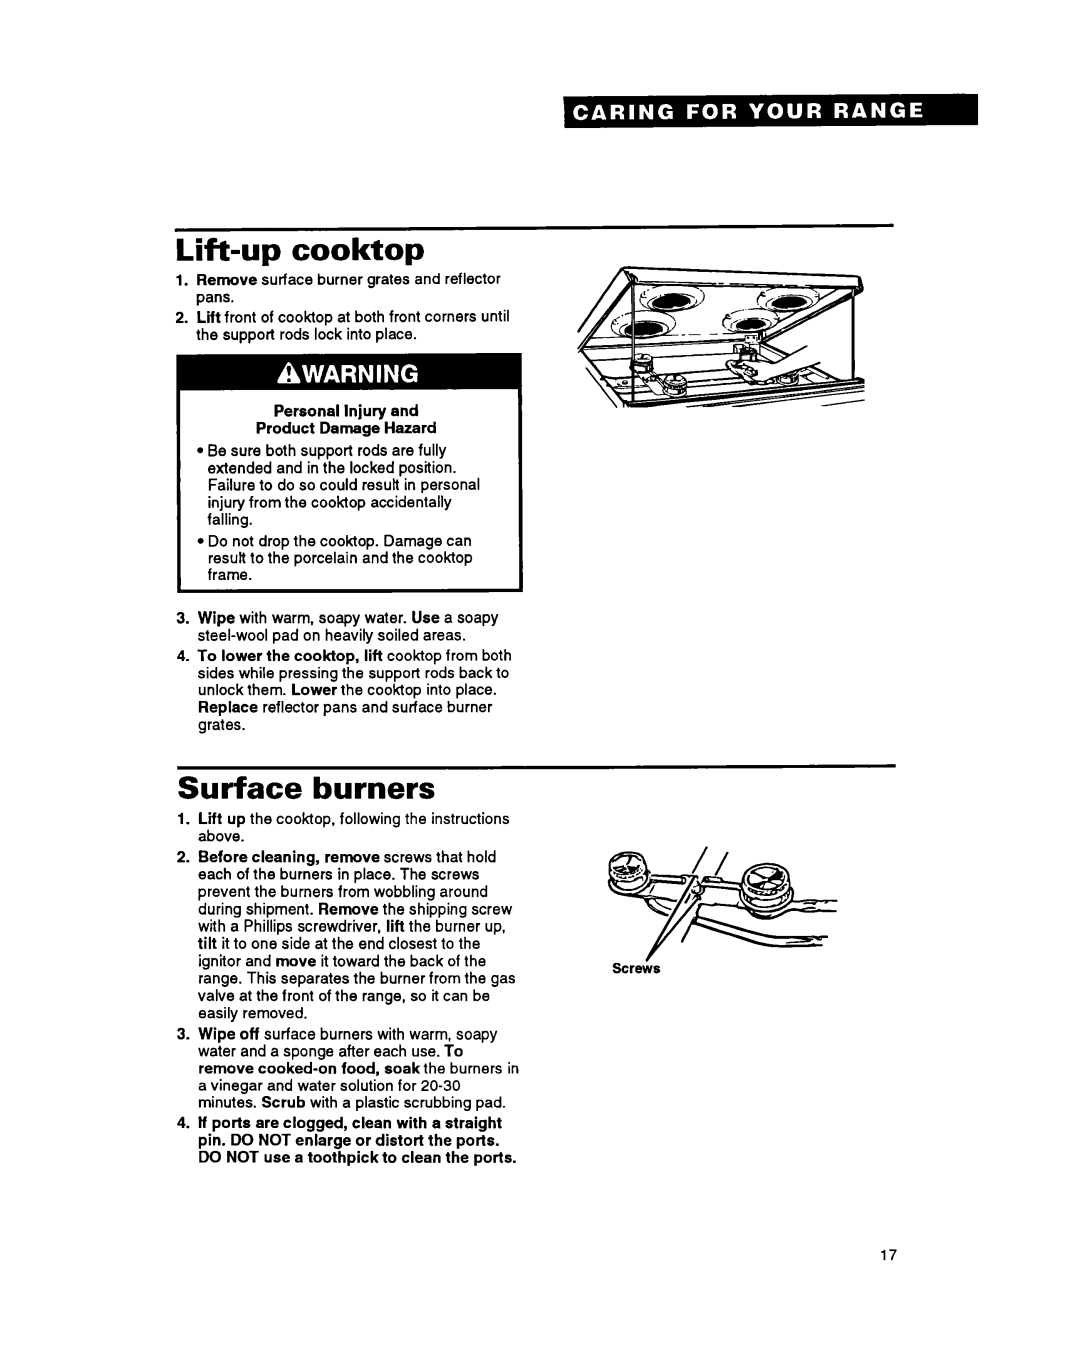 Whirlpool FGP345Y, FGP355Y, FGP335Y, FGC355Y important safety instructions Lift-upcooktop, Surface burners 